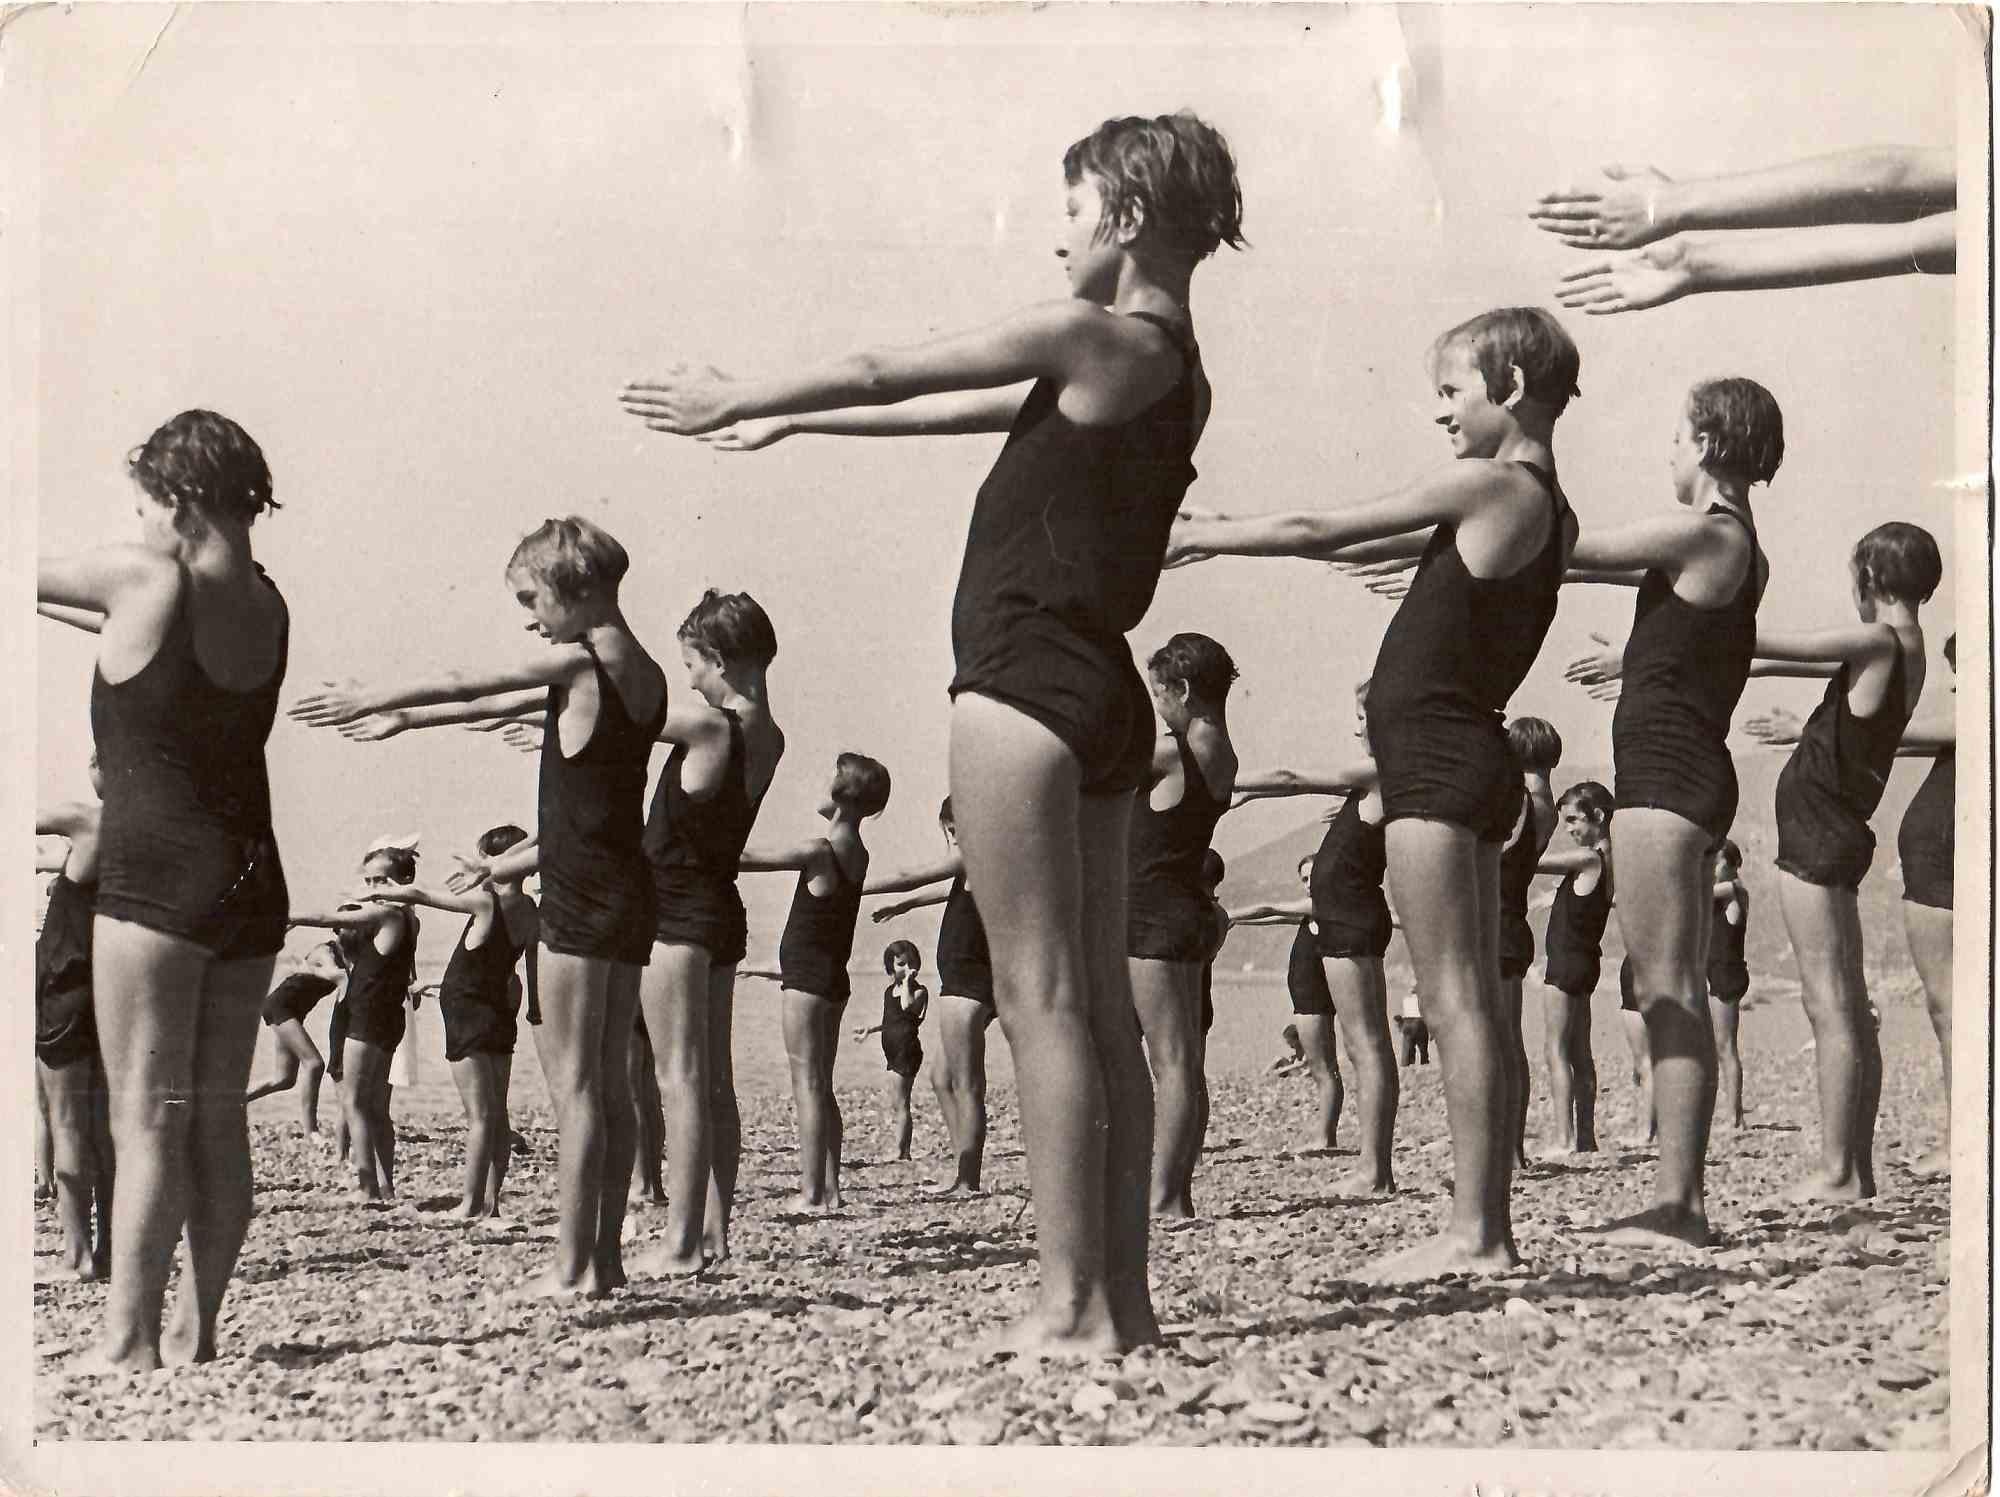 Unknown Figurative Photograph - Swimmer Girls - Vintage B/W photo - 1930s